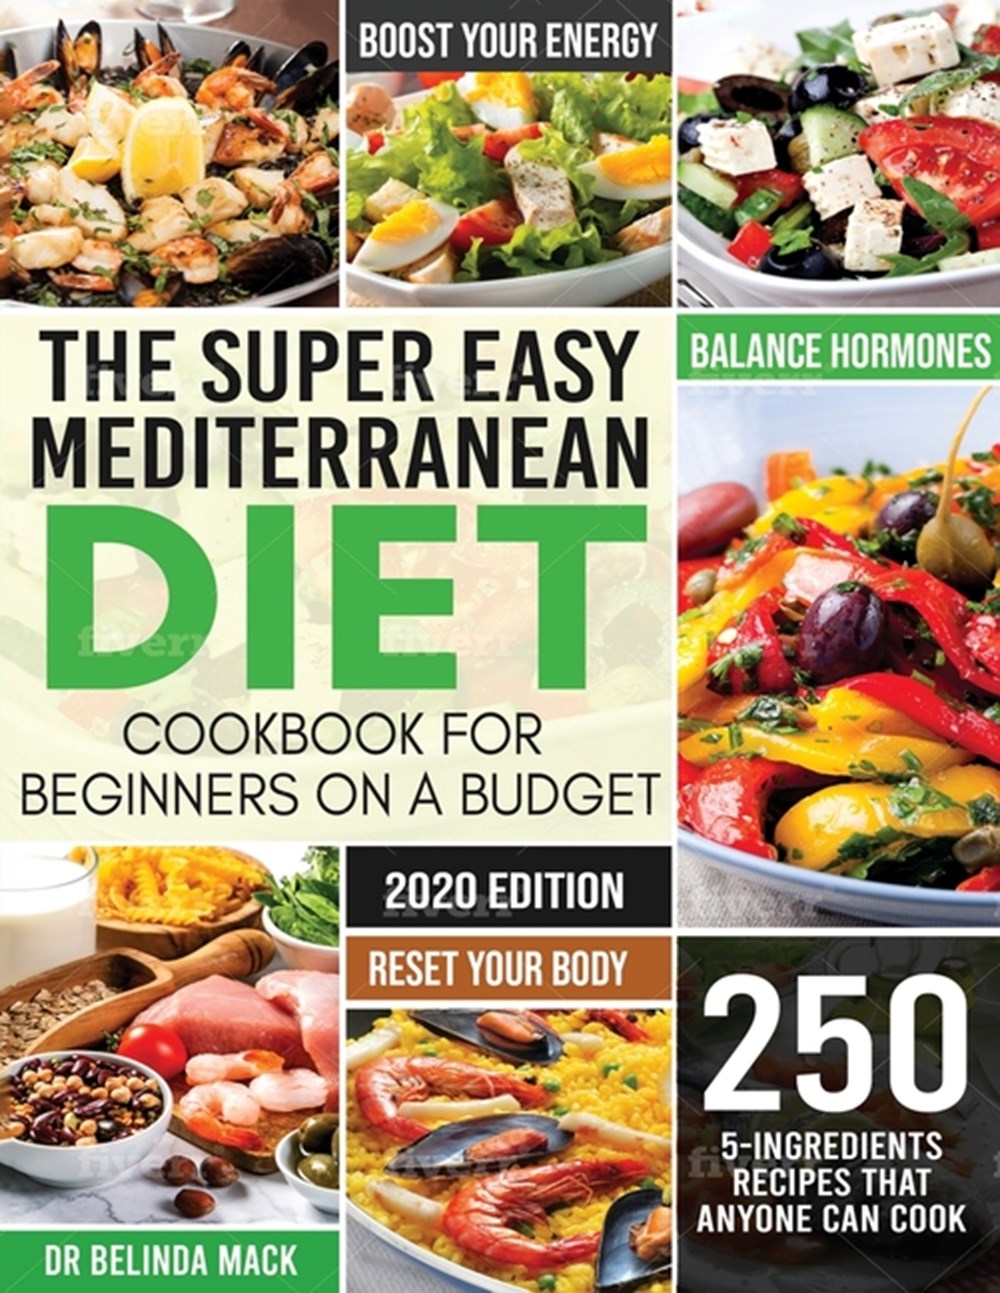 Super Easy Mediterranean Diet Cookbook for Beginners on a Budget: 250 5-ingredients Recipes that Any